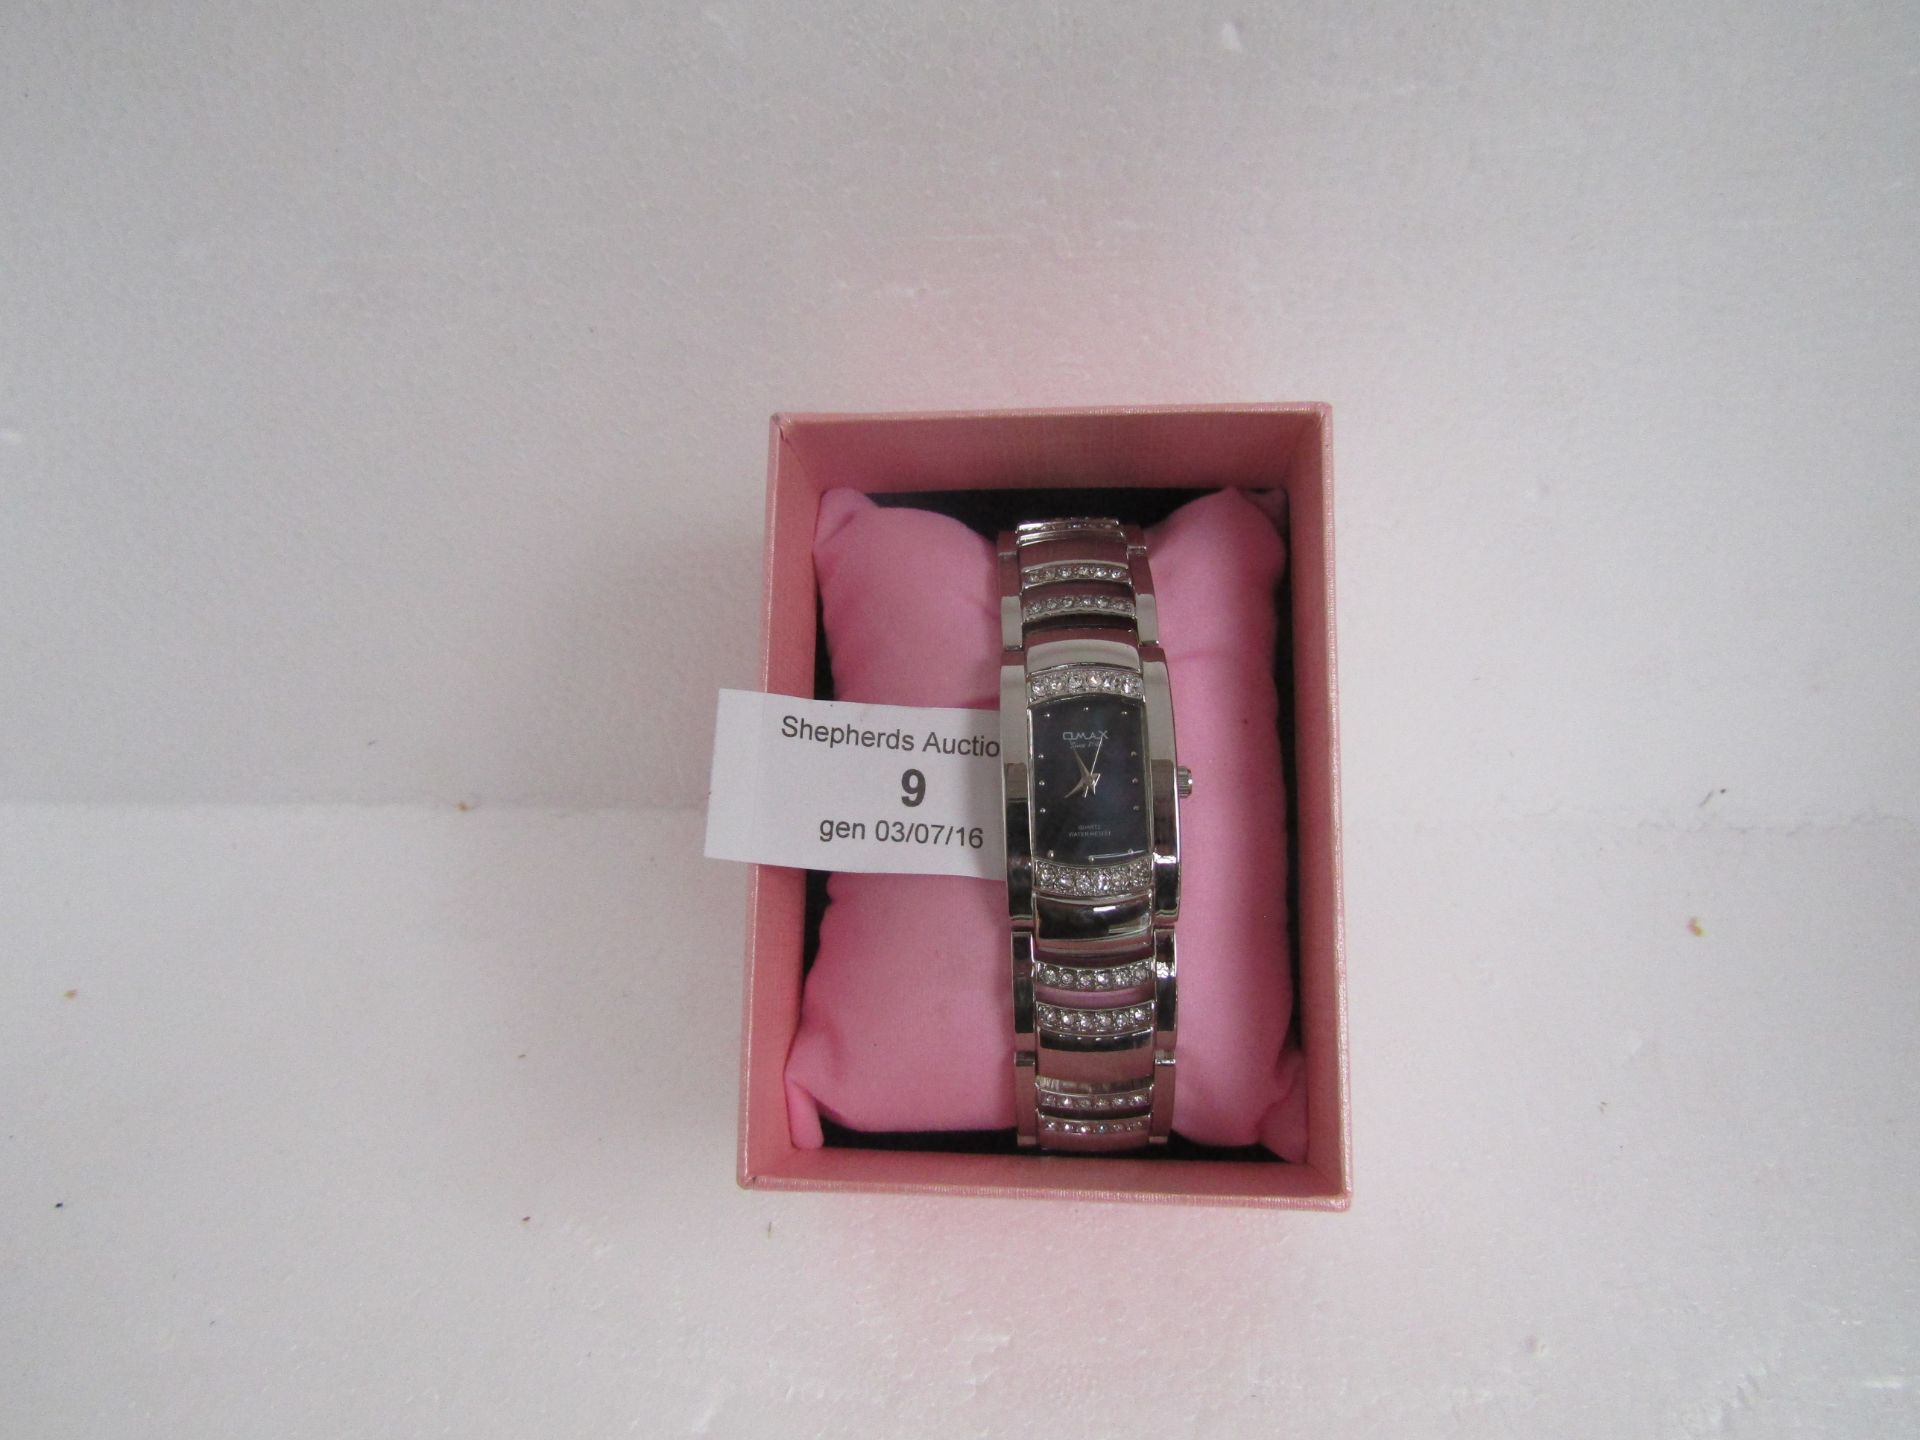 OMAX Woman's Watch (JES610), Comes New in a Presentation Box.